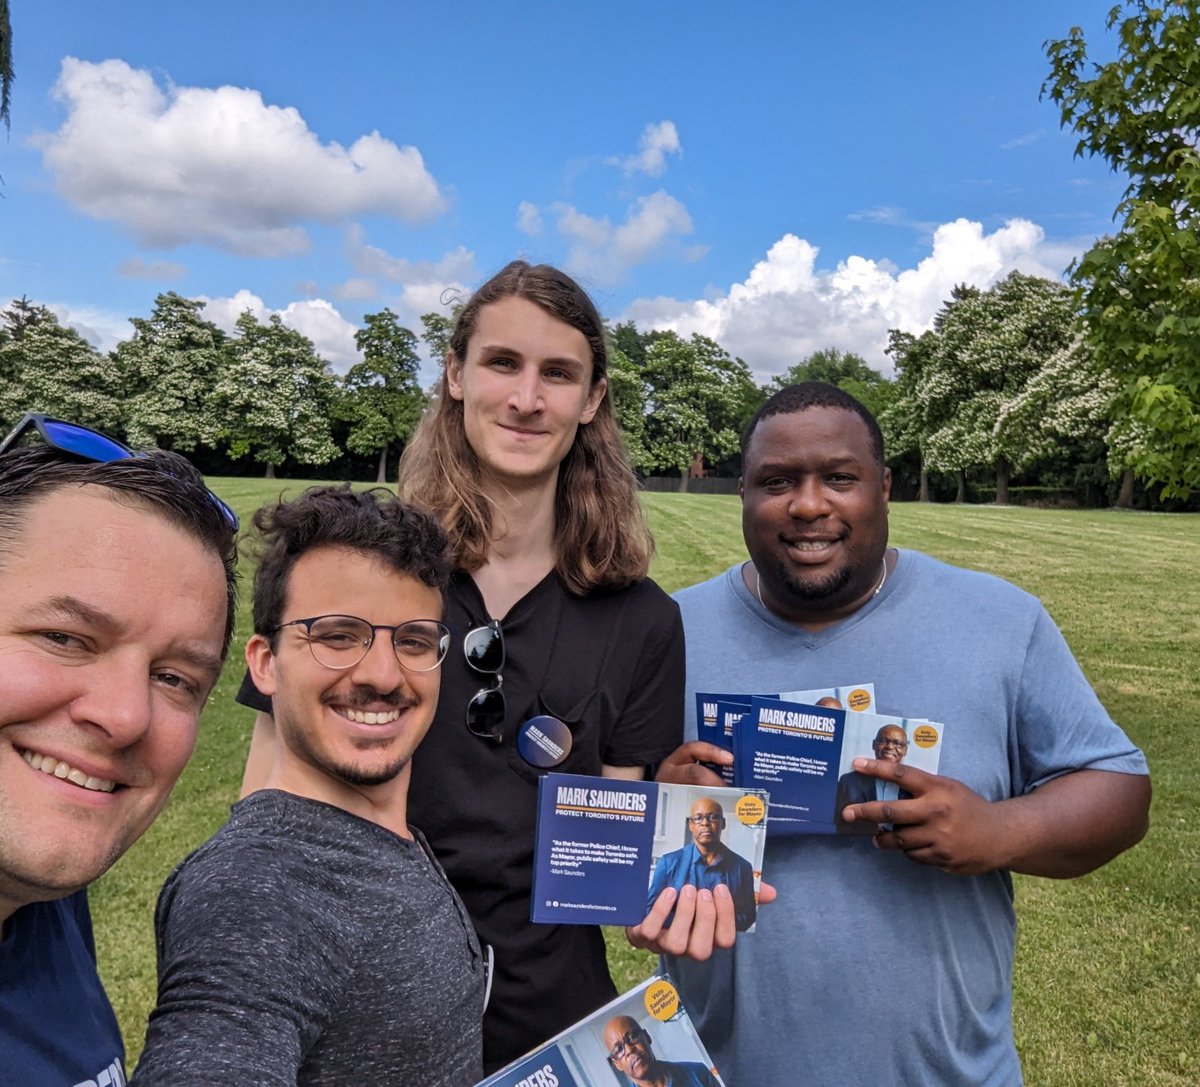 GOTV teams are out across the city!